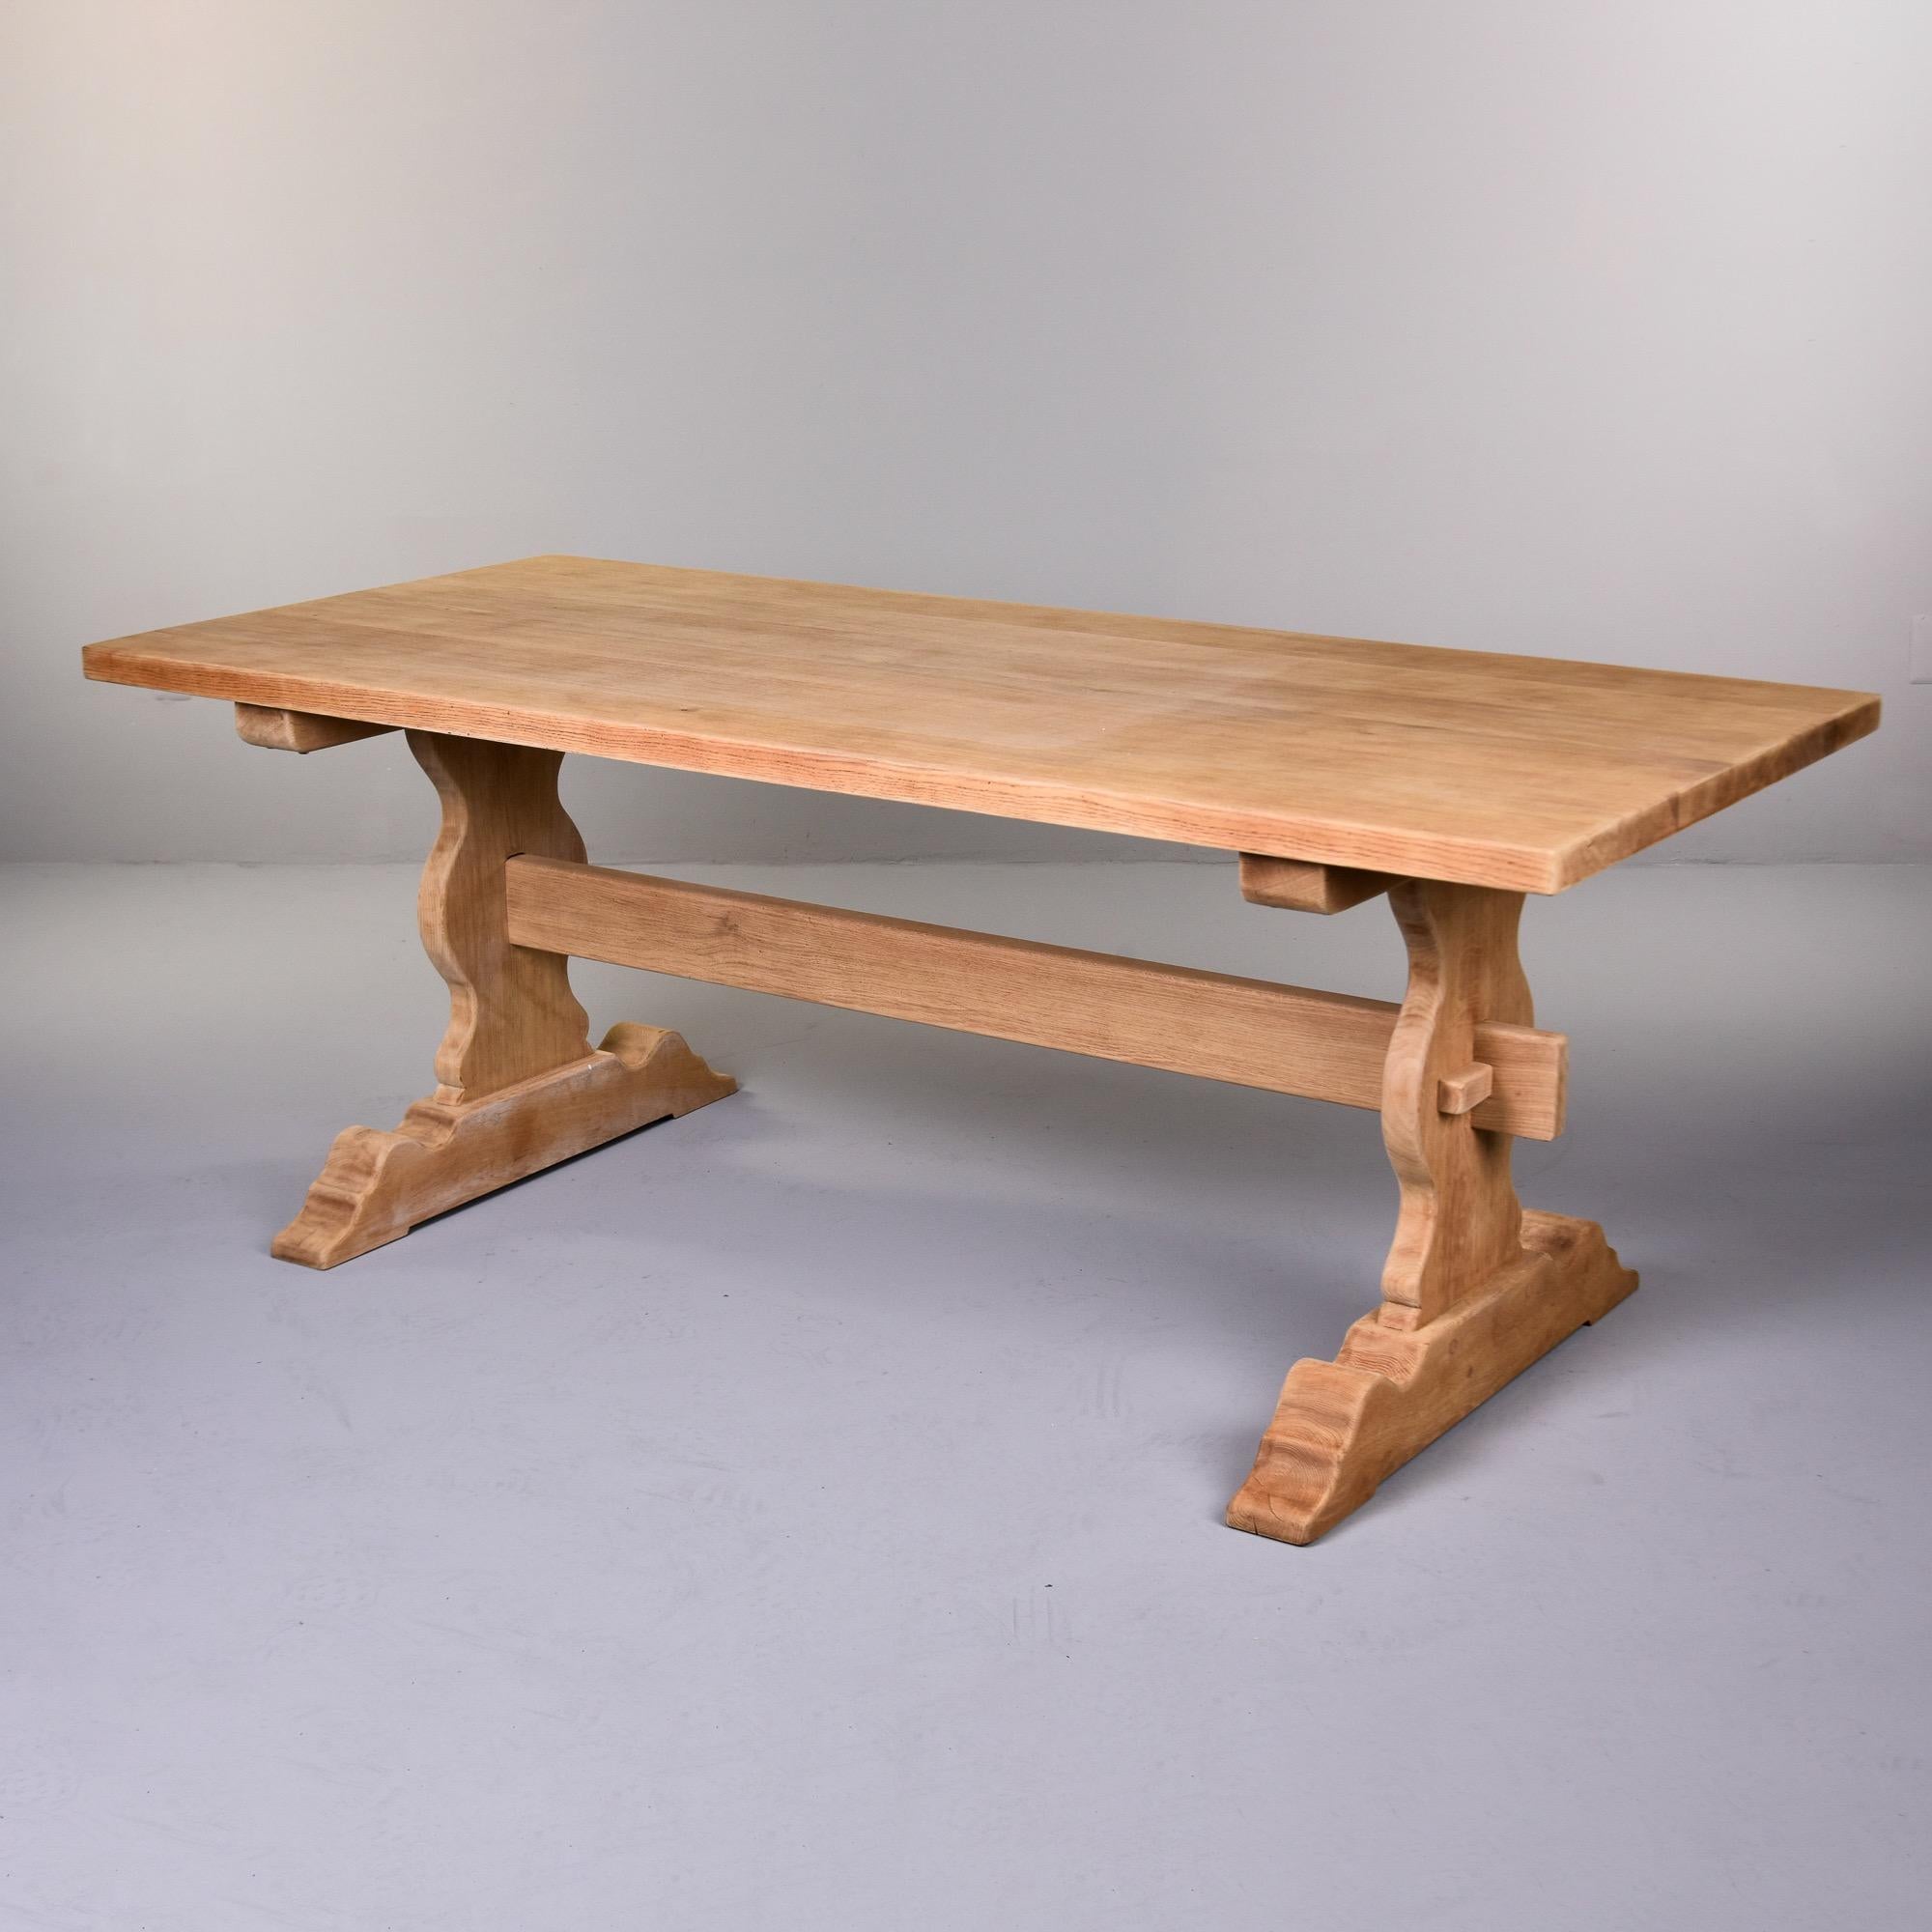 Found in France, this circa 1900 French oak farm trestle table has a bare finish and has been sanded smooth.  Classic trestle-style table is structurally sturdy with mortise and tenon construction. Scattered visible age and honest wear to table top